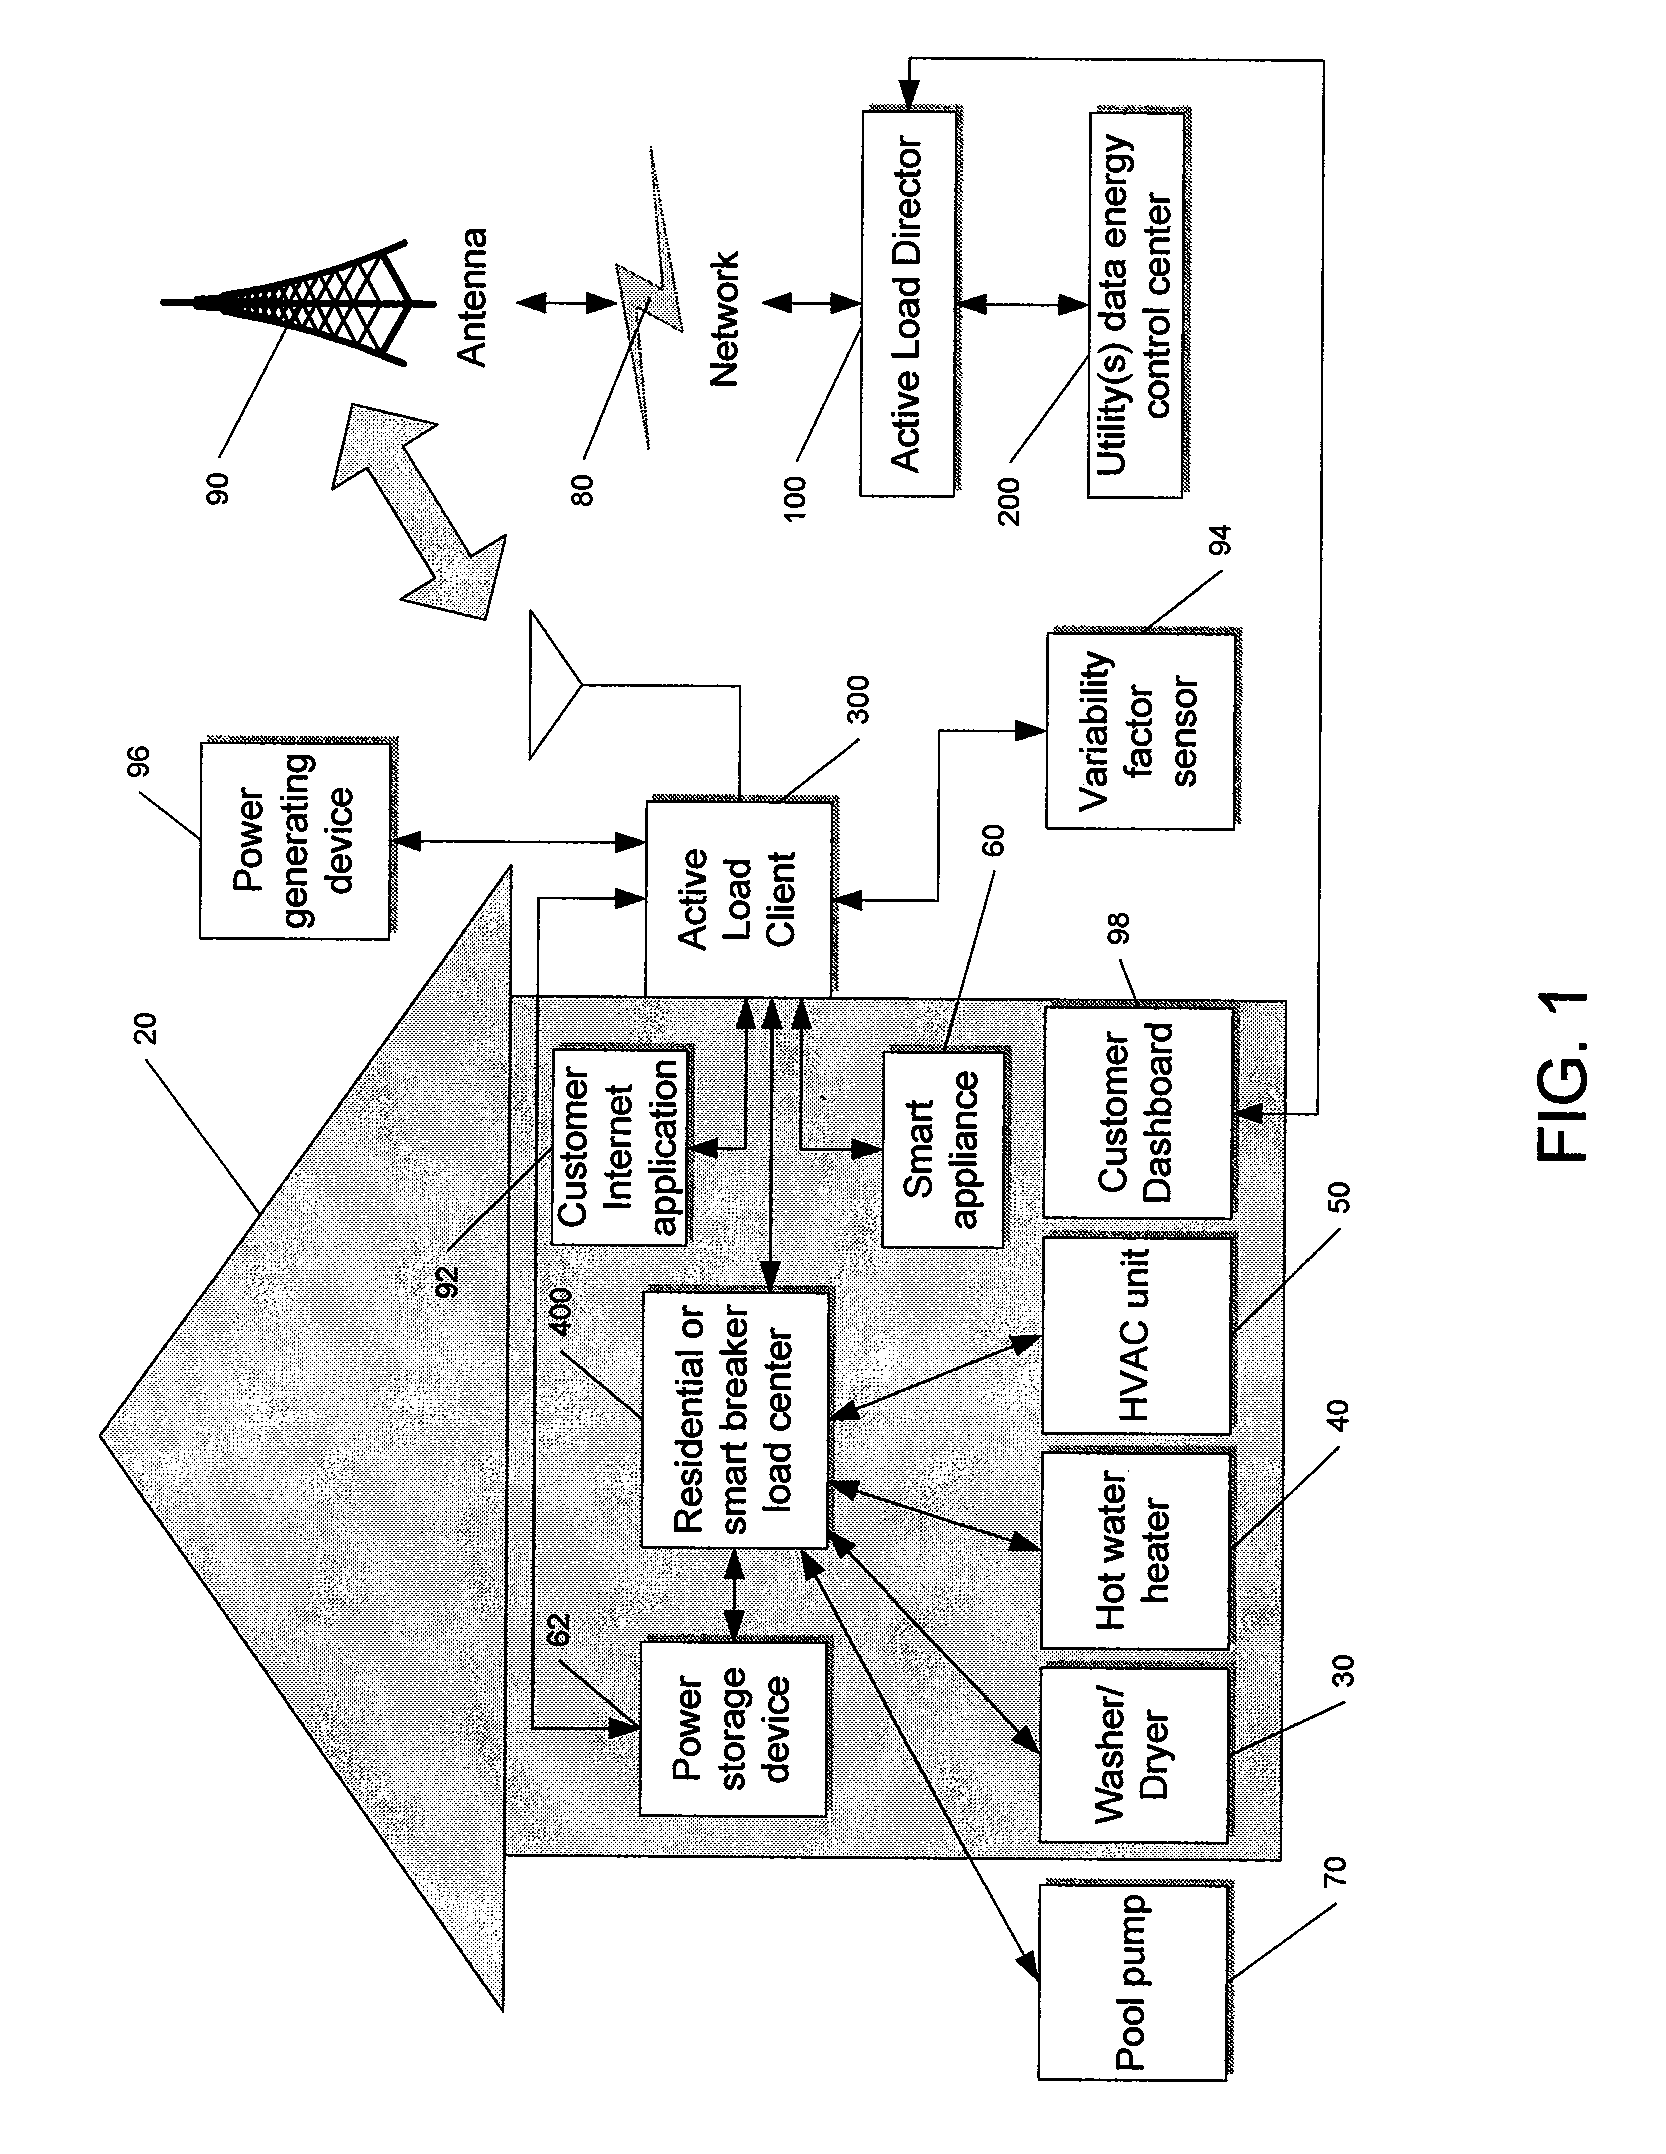 System and method for selective disconnection of electrical service to end customers